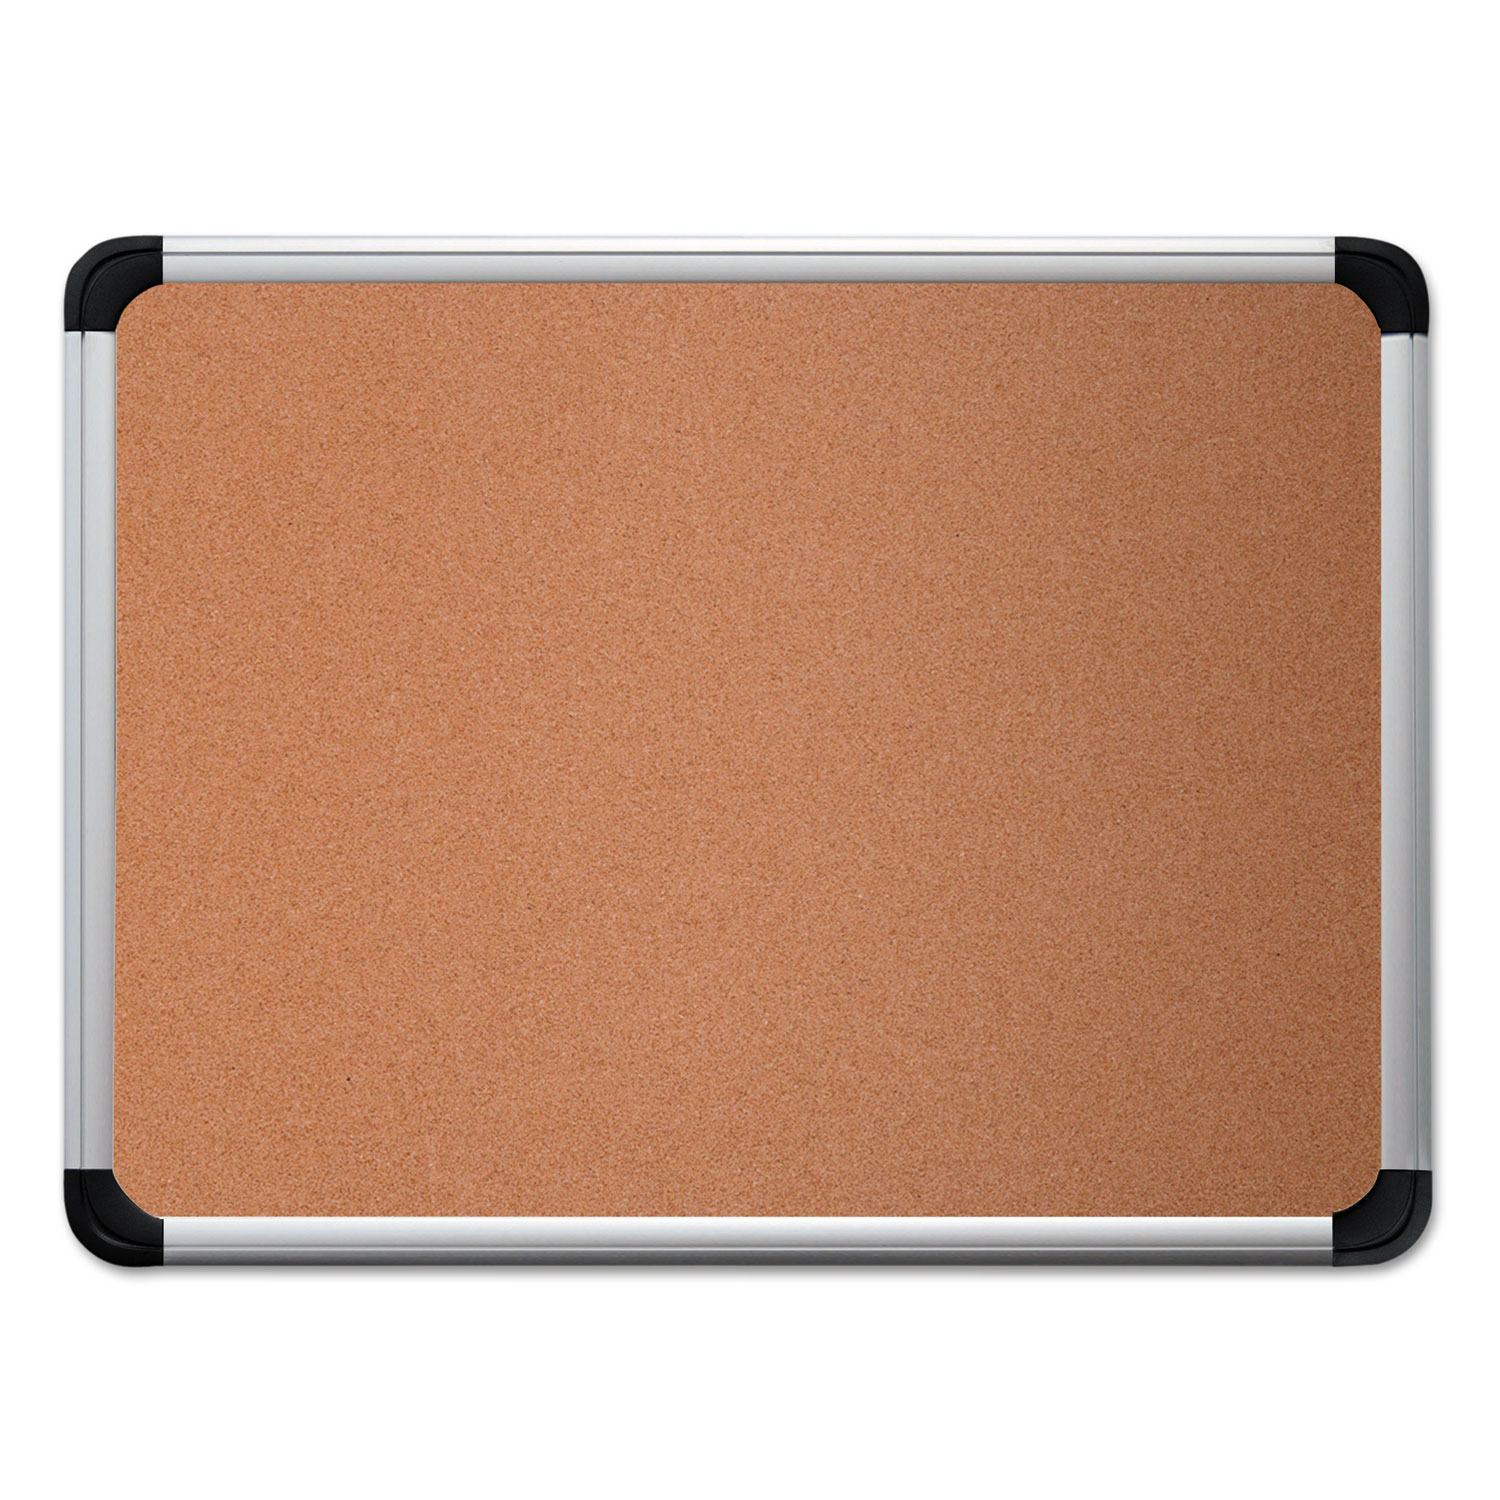  Universal UNV43713 Cork Board with Aluminum Frame, 36 x 24, Natural, Silver Frame (UNV43713) 